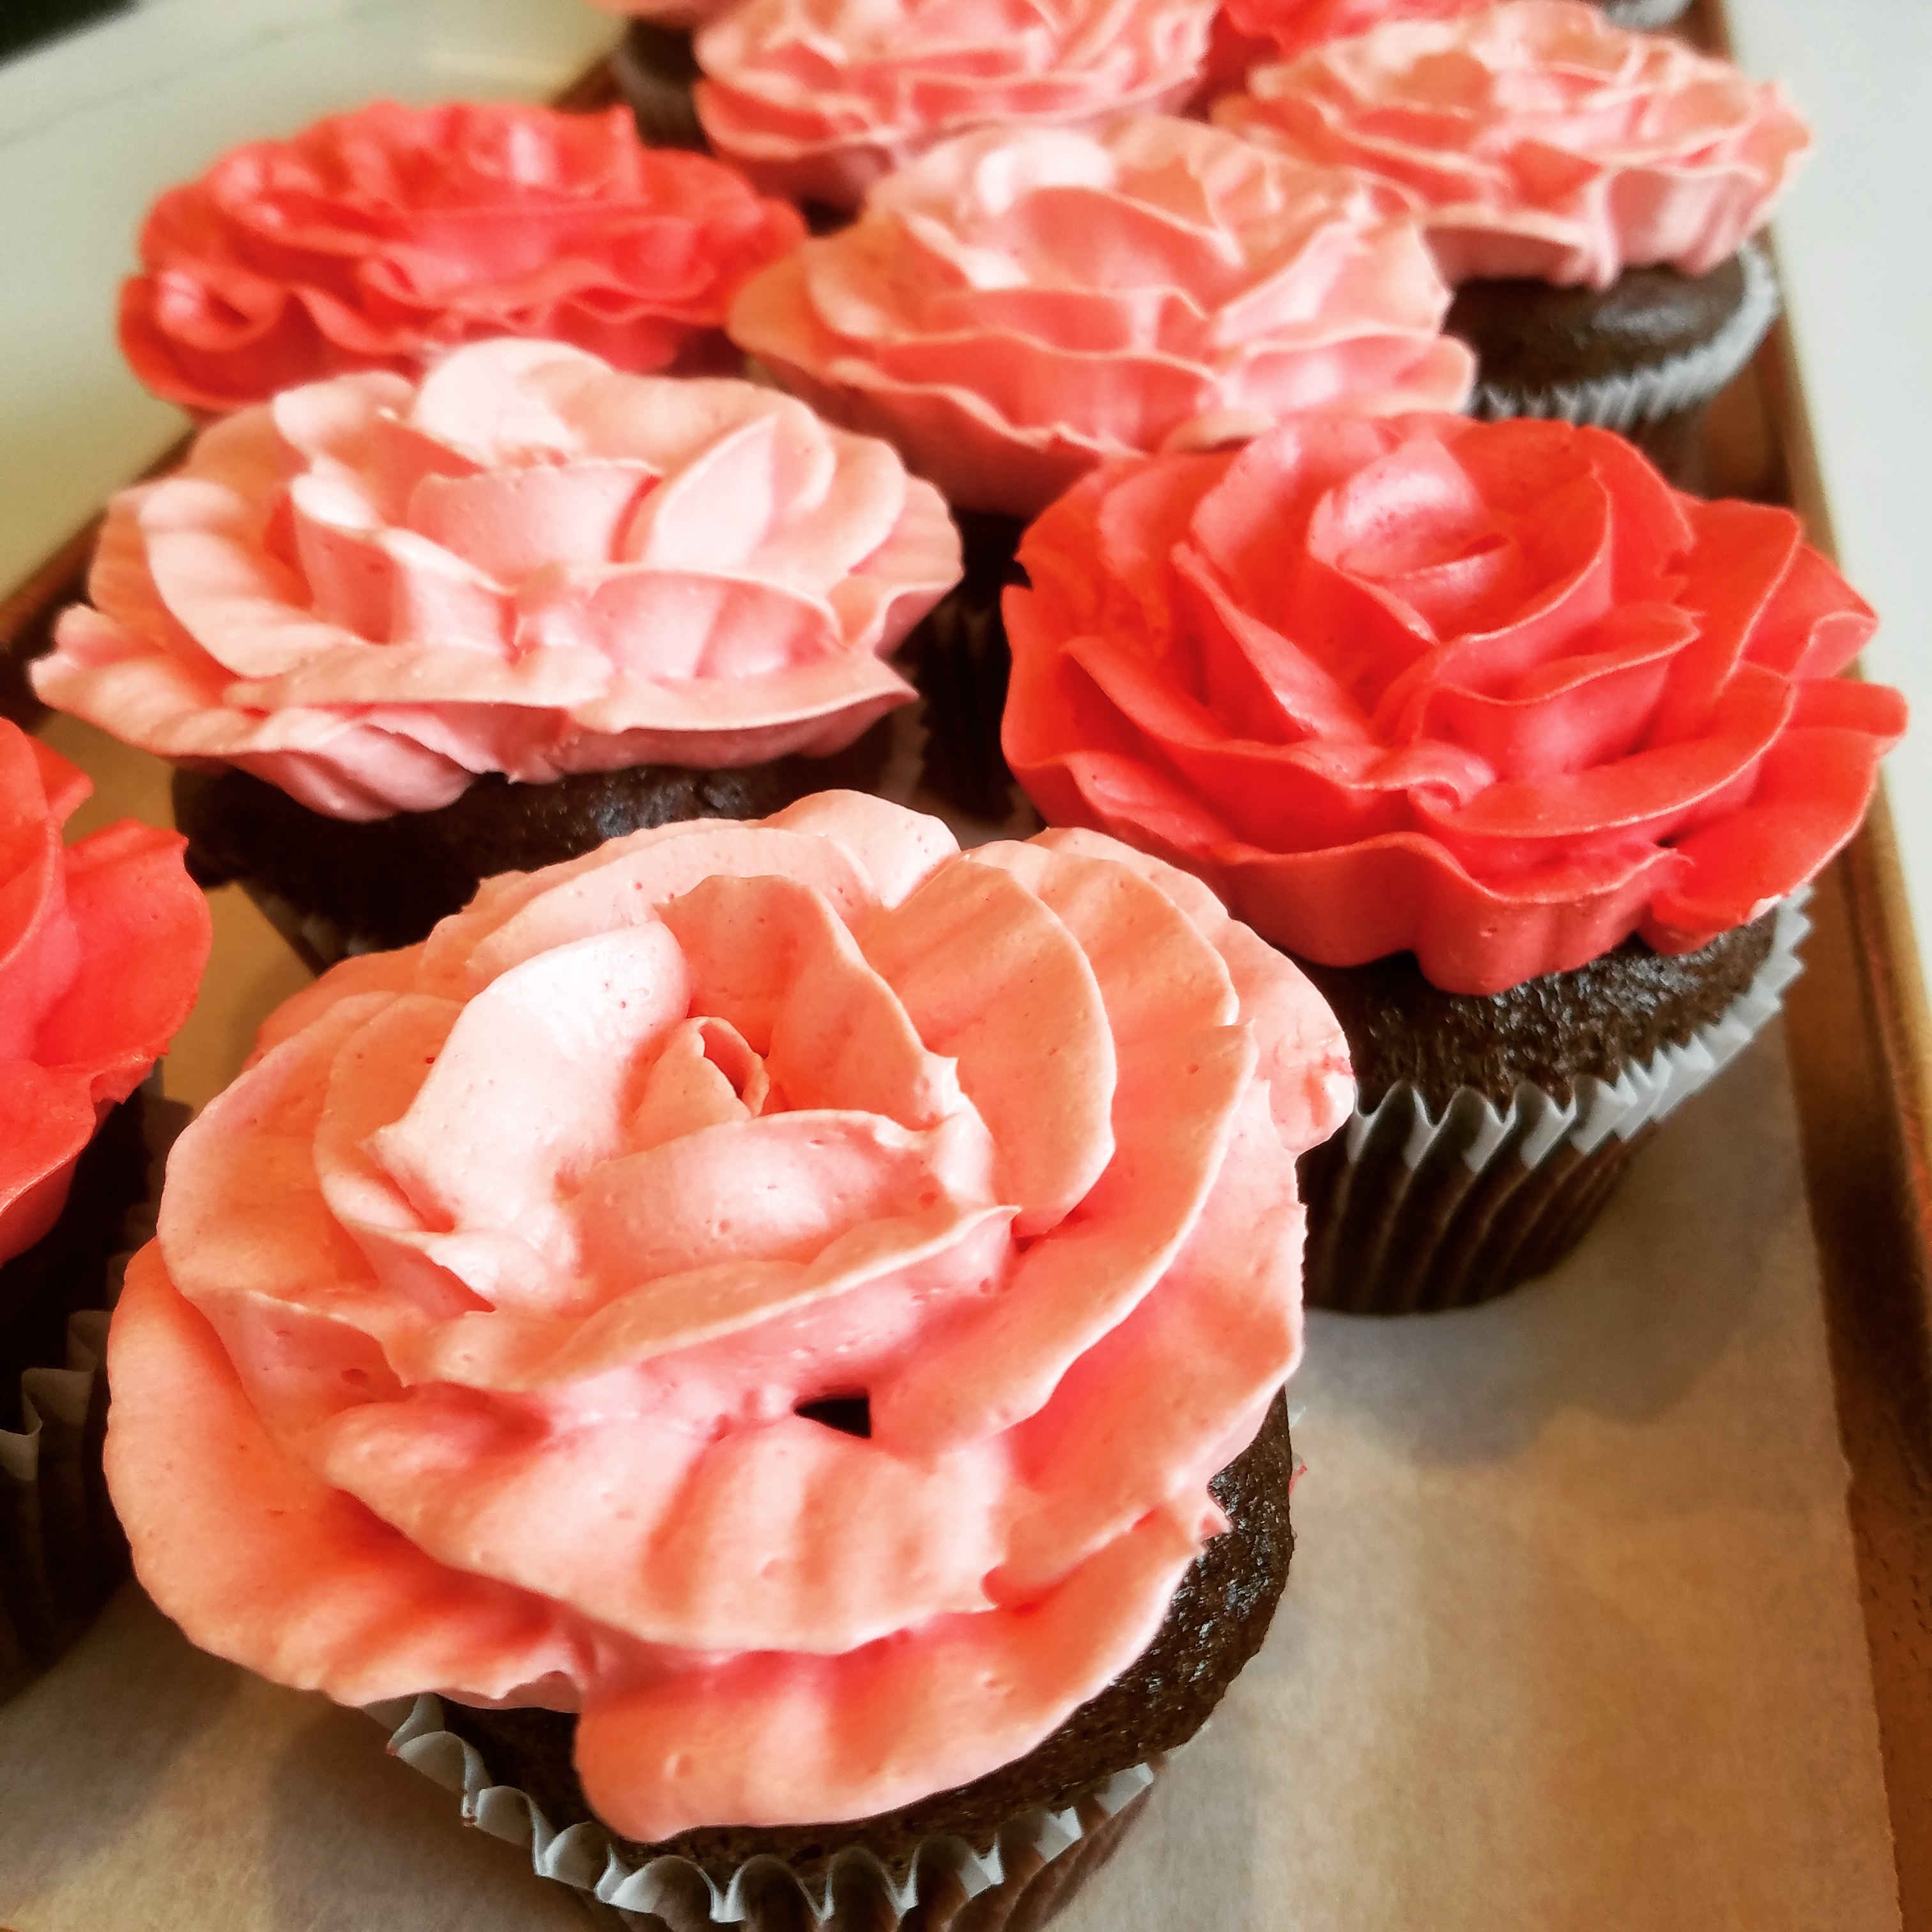 Chocolate Valentine's Day cupcakes frosted with pink and red buttercream flowers.